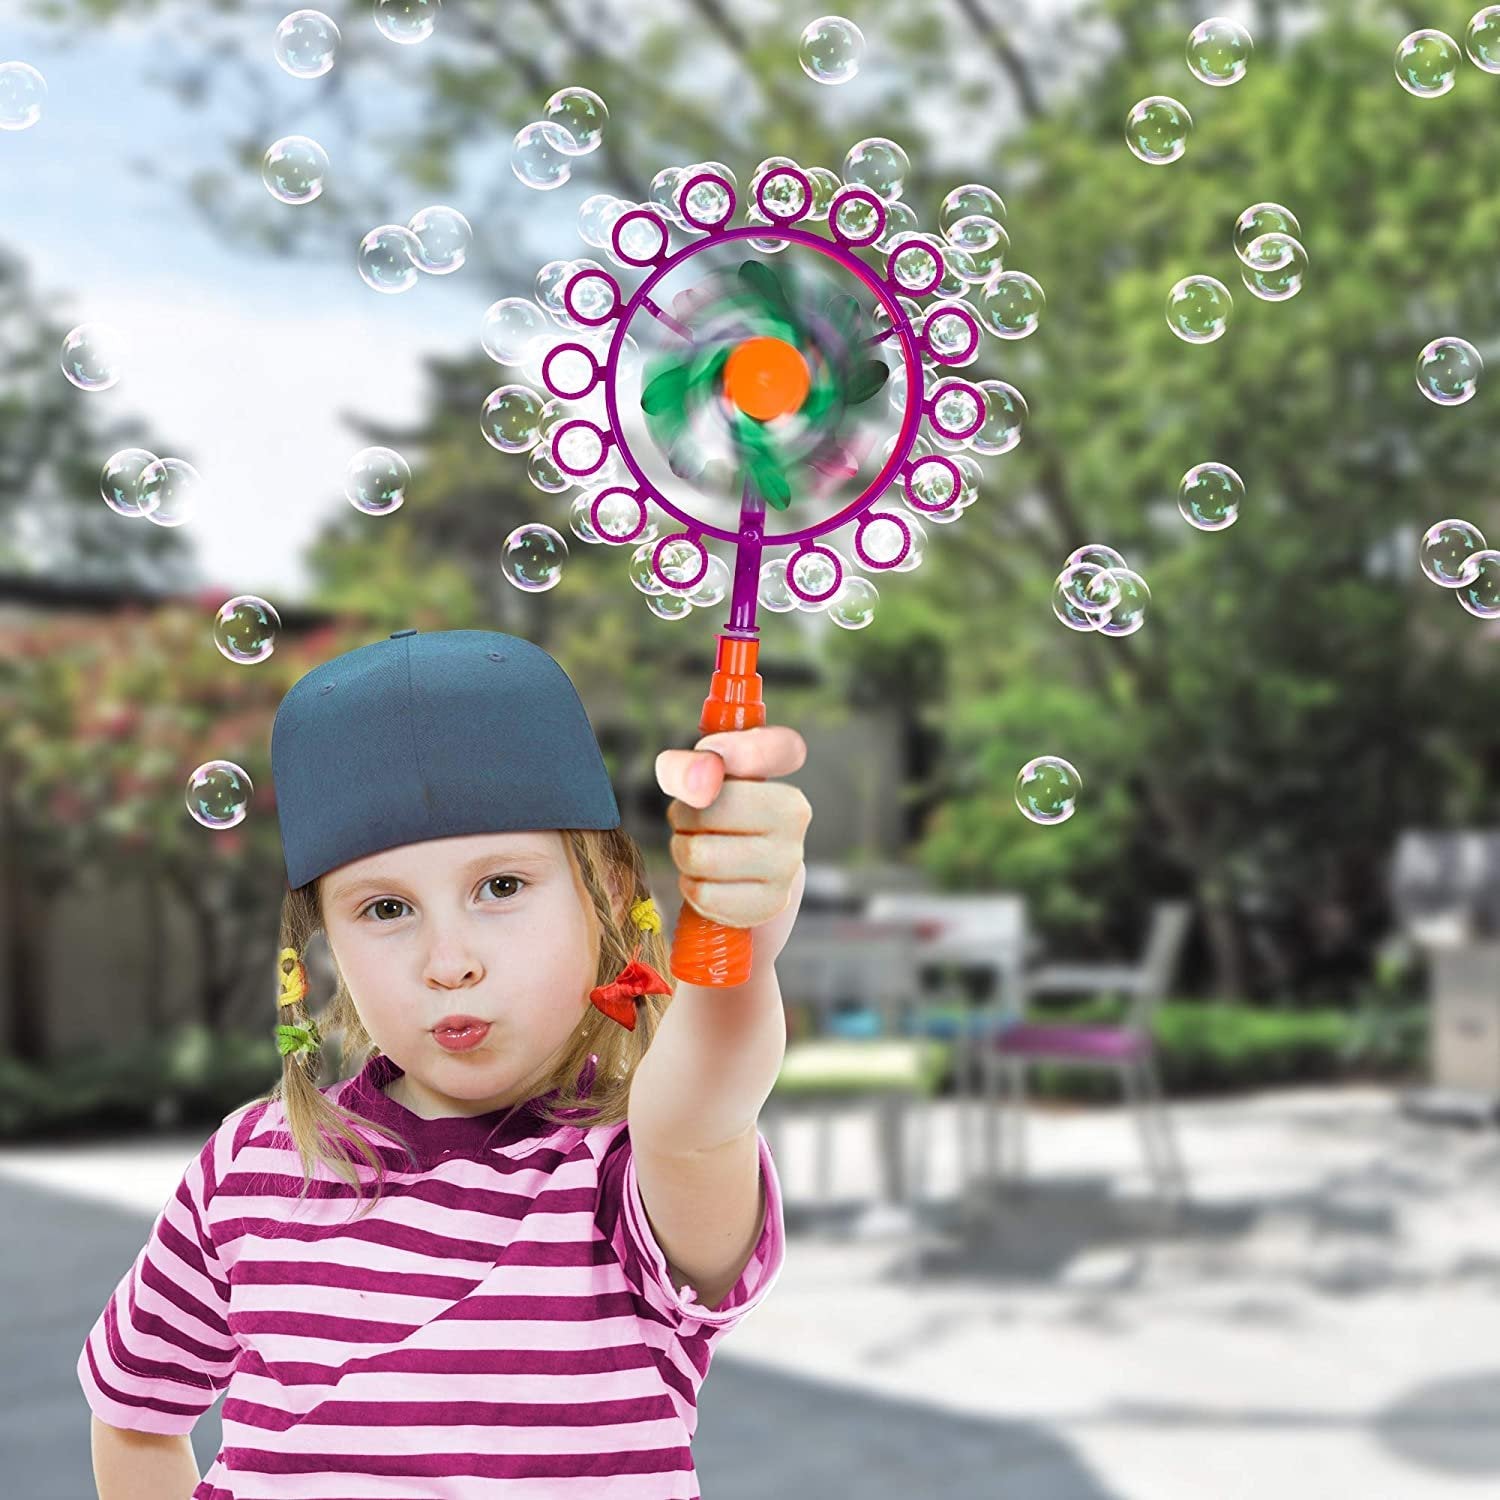 Windmill Bubble Wand, 15.5" Bubble Blower and Pinwheel Spinner for Kids with Solution in Handle, Outdoor Activity for Summer and Backyard Fun, Best Gift for Boys and Girls